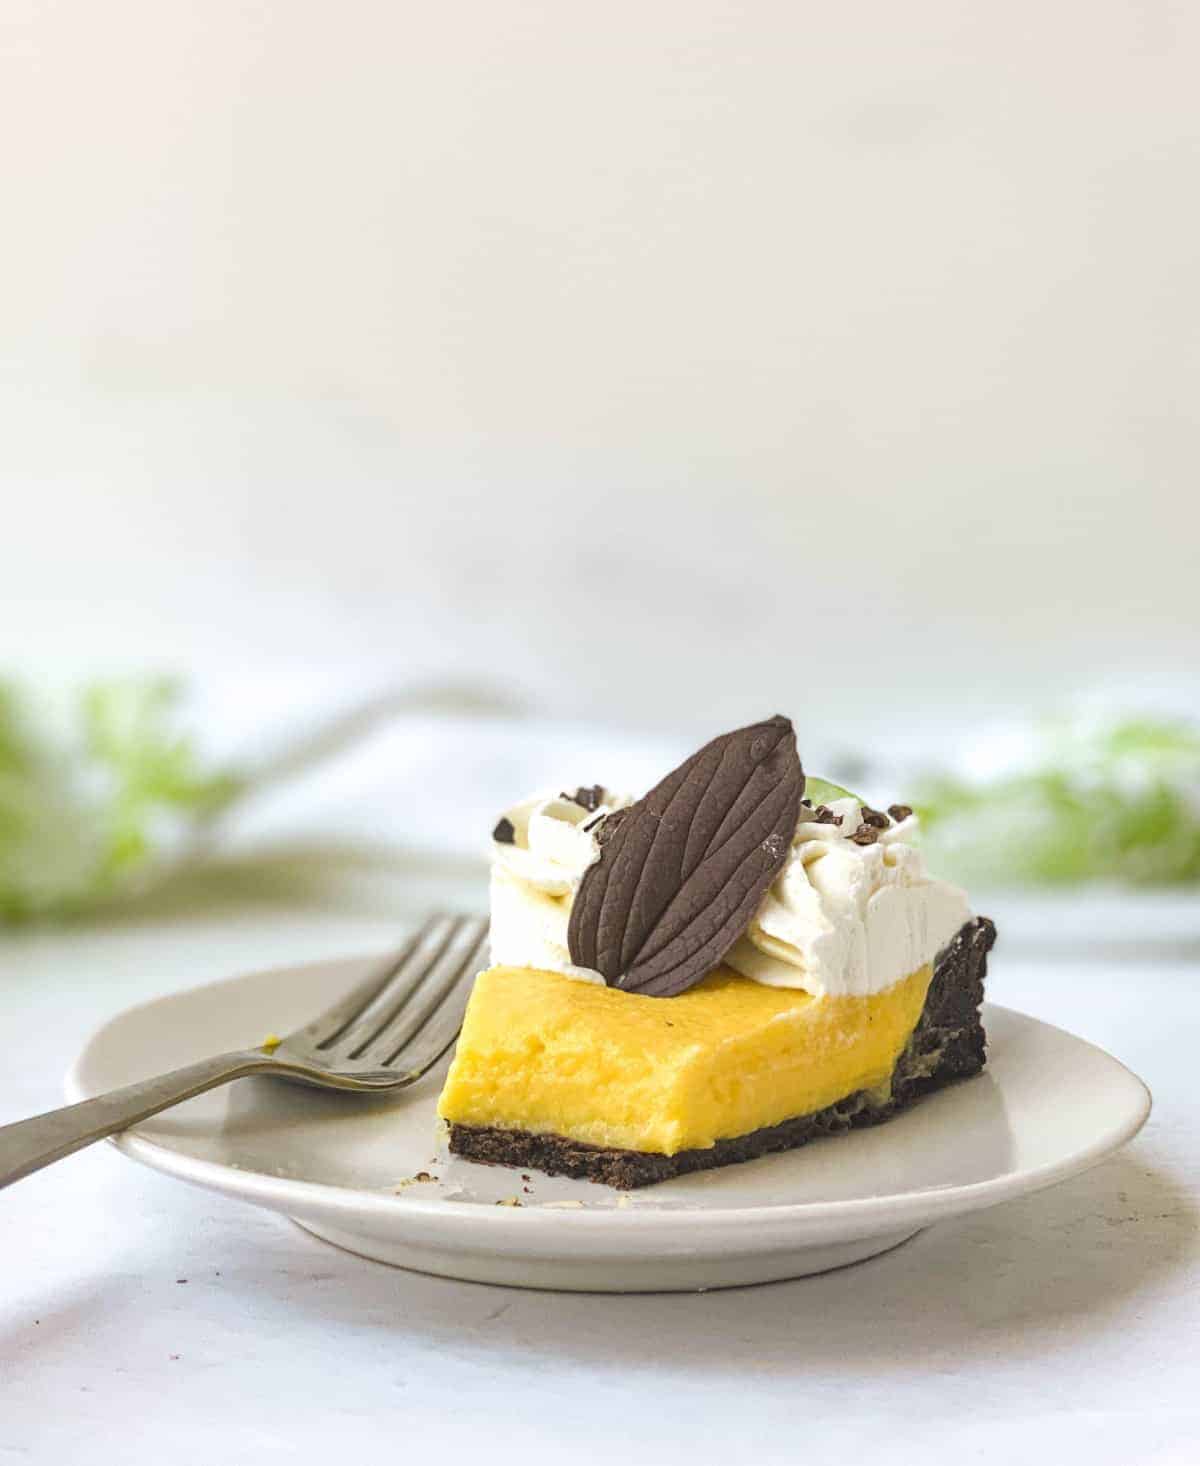 A partially eaten slice of Chocolate Mango Tart on a white plate with a fork next to it